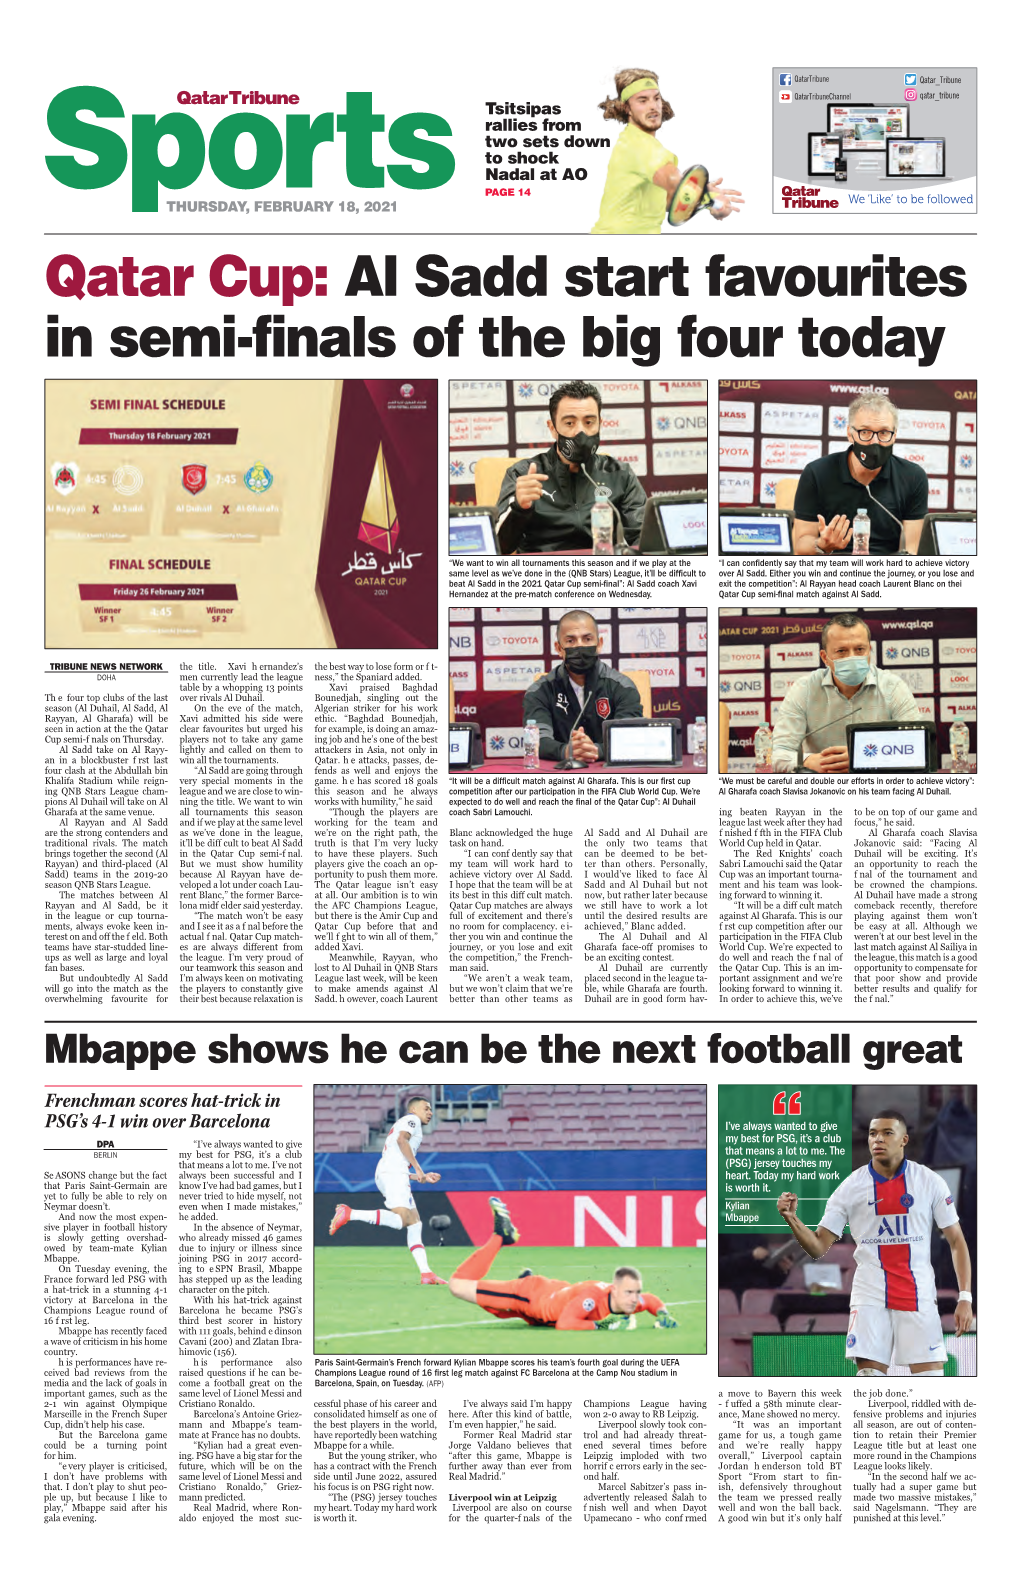 Al Sadd Start Favourites in Semi-Finals of the Big Four Today